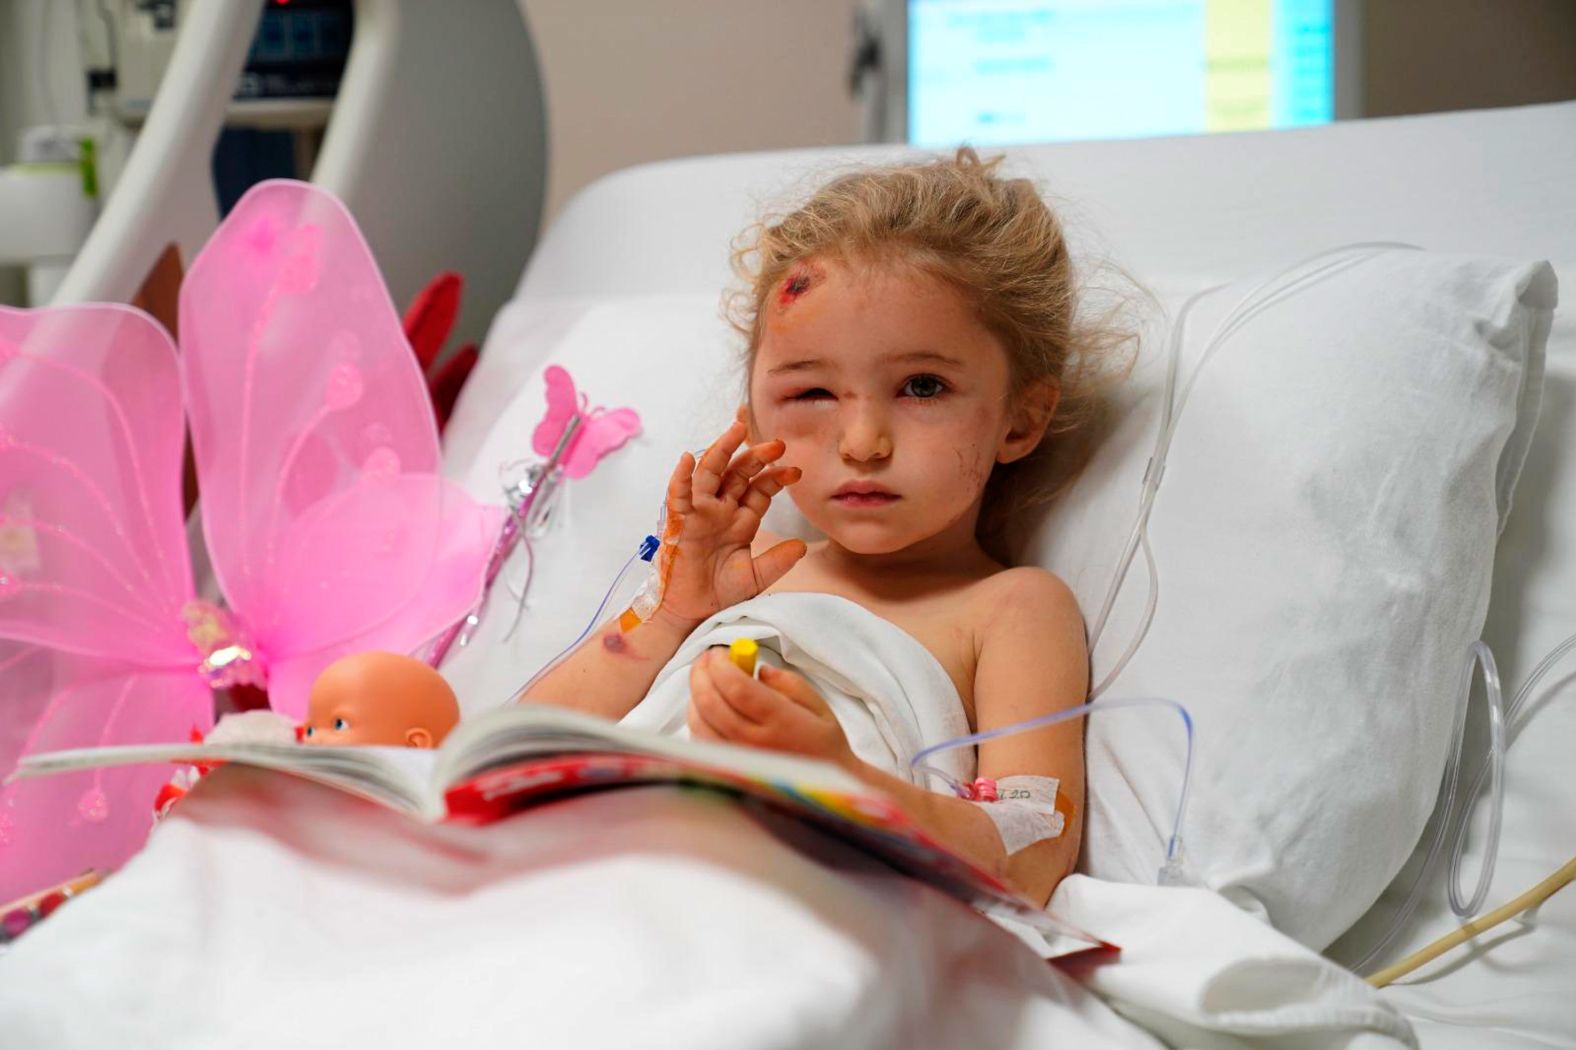 Elif rests in a hospital bed <a href="https://edition.cnn.com/2020/11/02/europe/turkey-earthquake-girl-rescue-intl-hnk/index.html" target="_blank">following her rescue.</a>